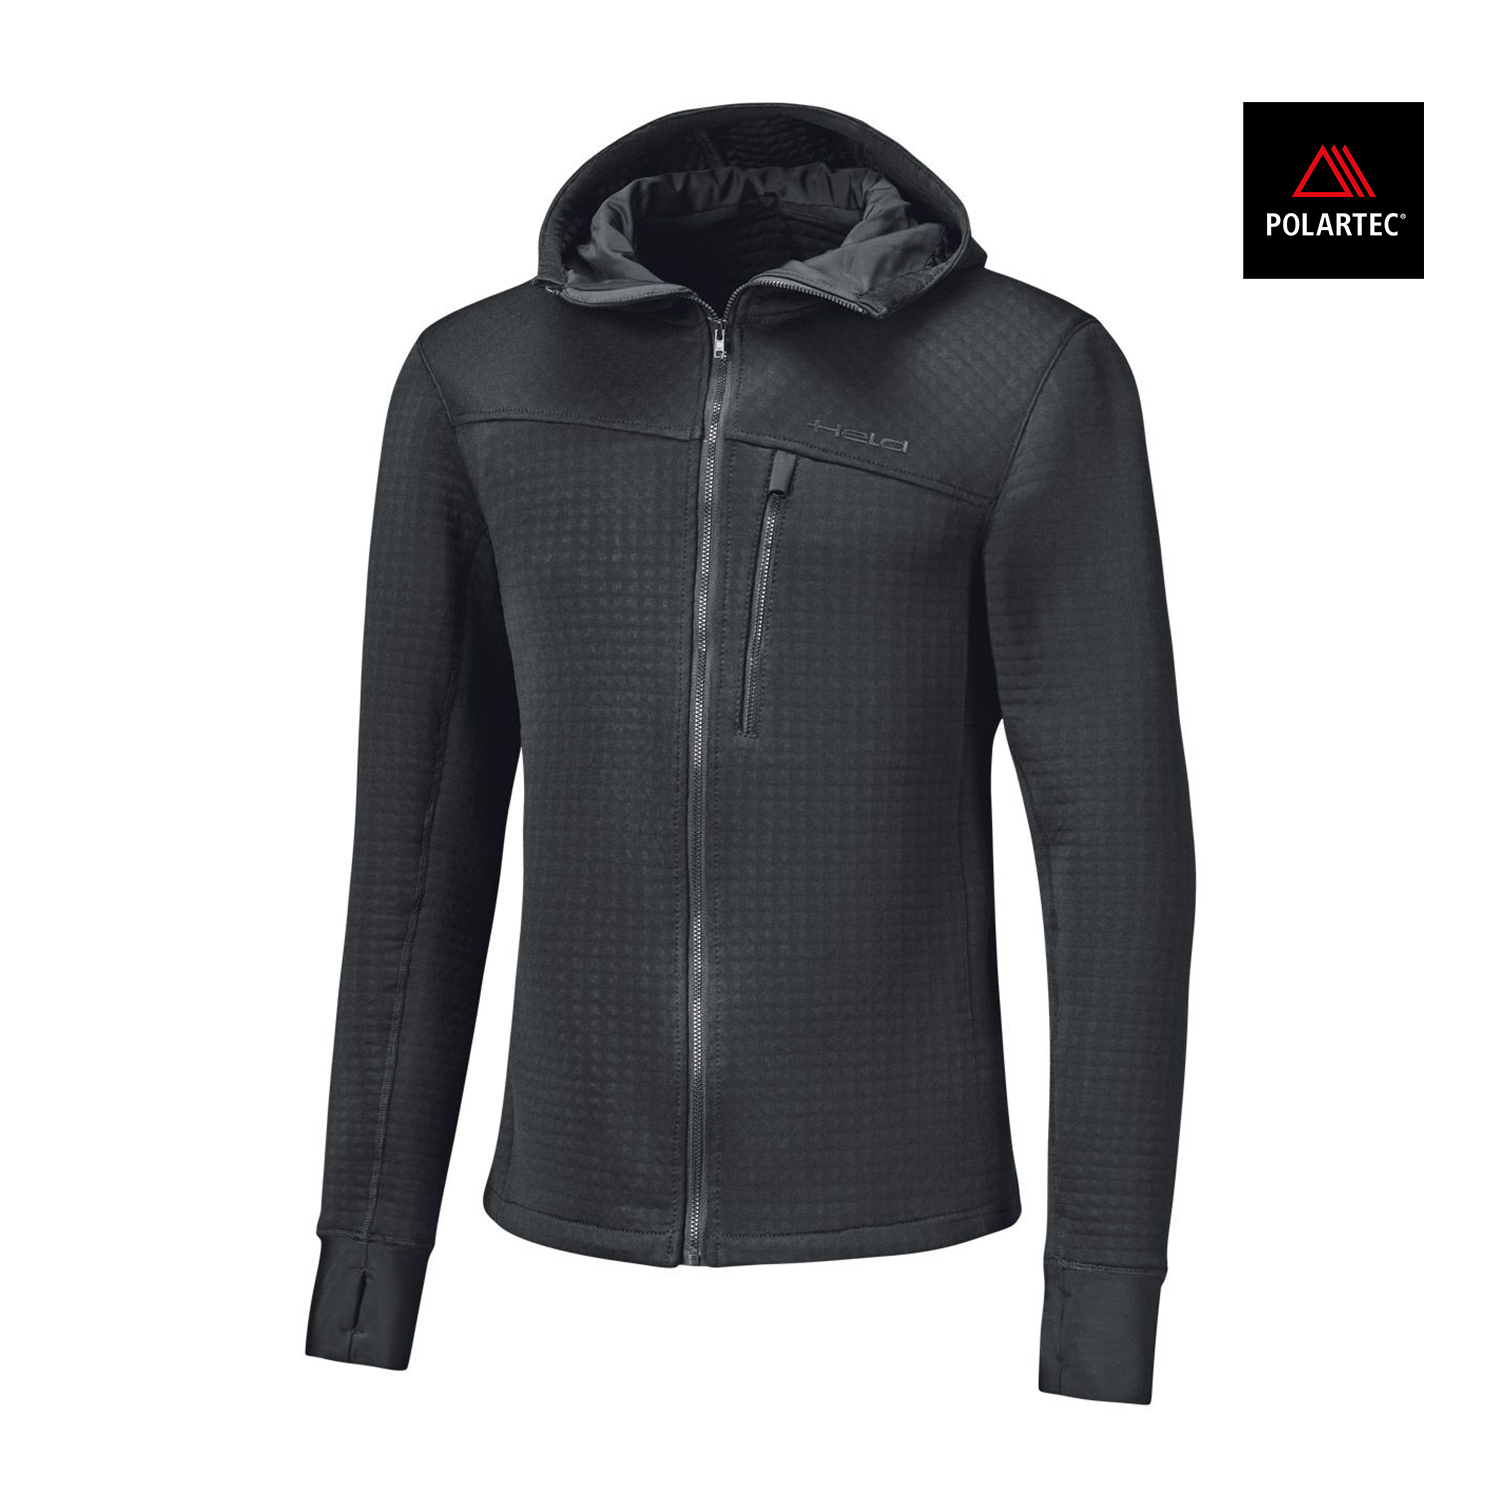 Held Polar Jacket Black - Available in Various Sizes